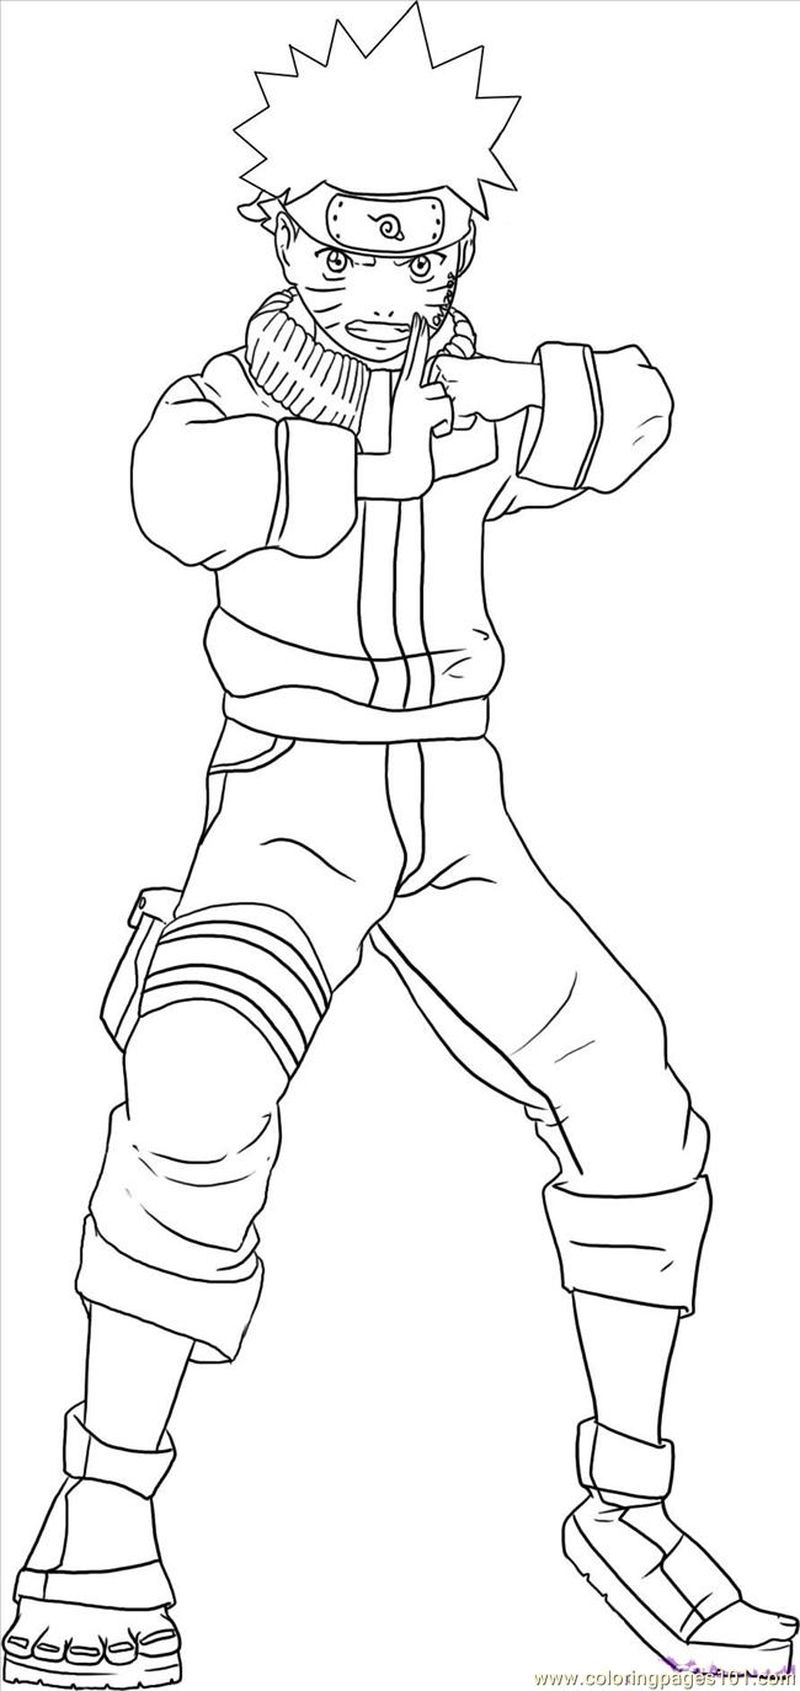 Naruto Shippuden Coloring Pages Printable